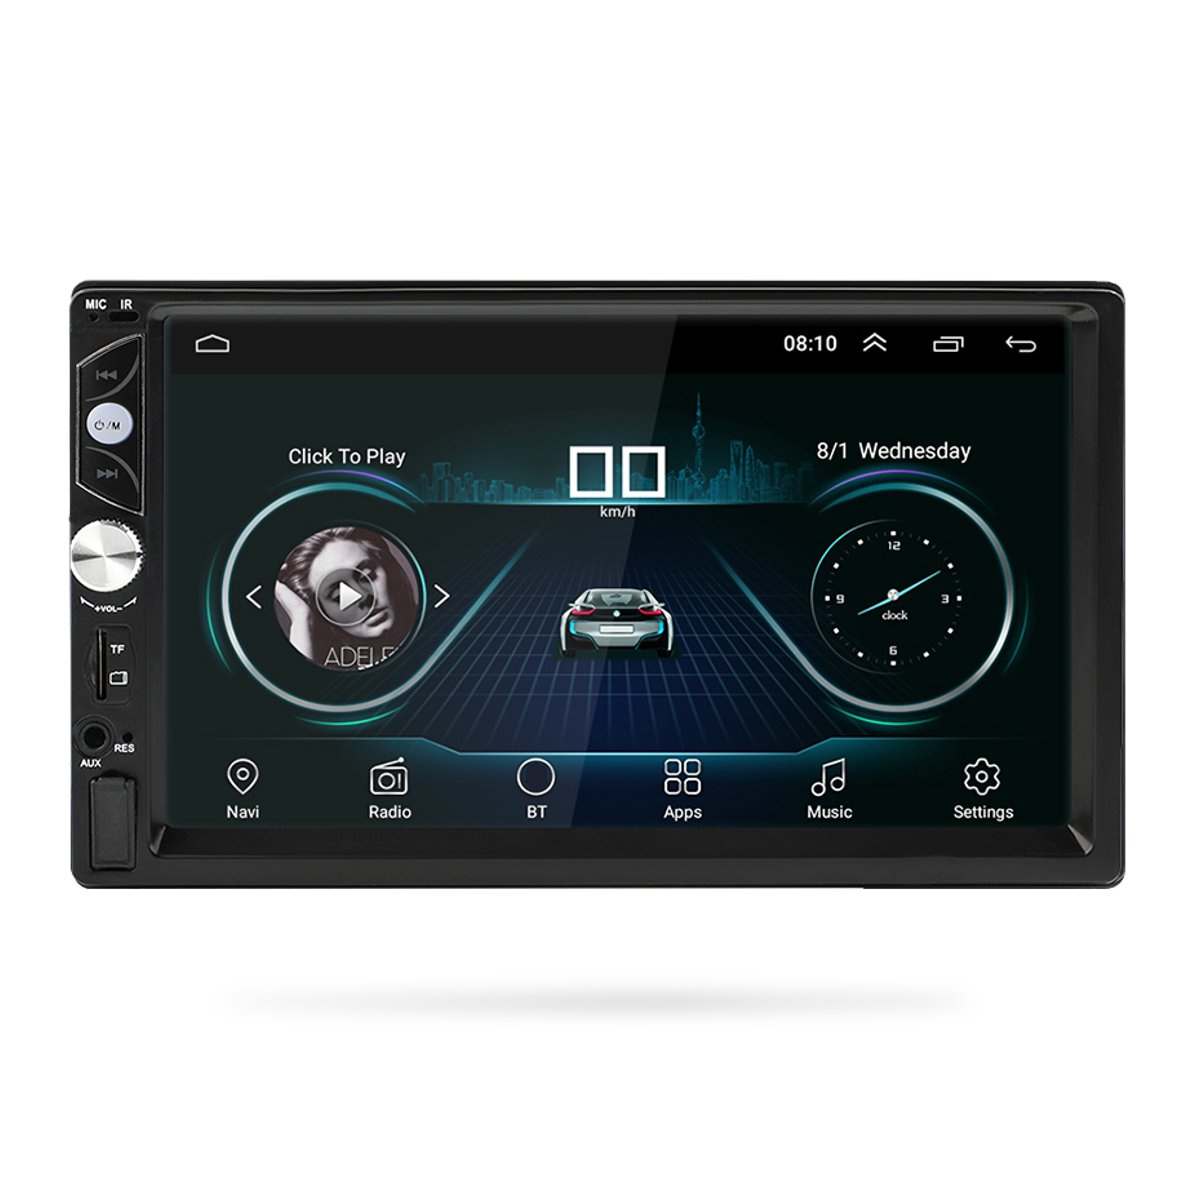 

7 Inch 2 DIN for Android 8.1 HD Car Radio Stereo Player 1G+16G MP5 Touch Screen GPS Rear View Handsfree bluetooth WIFI FM